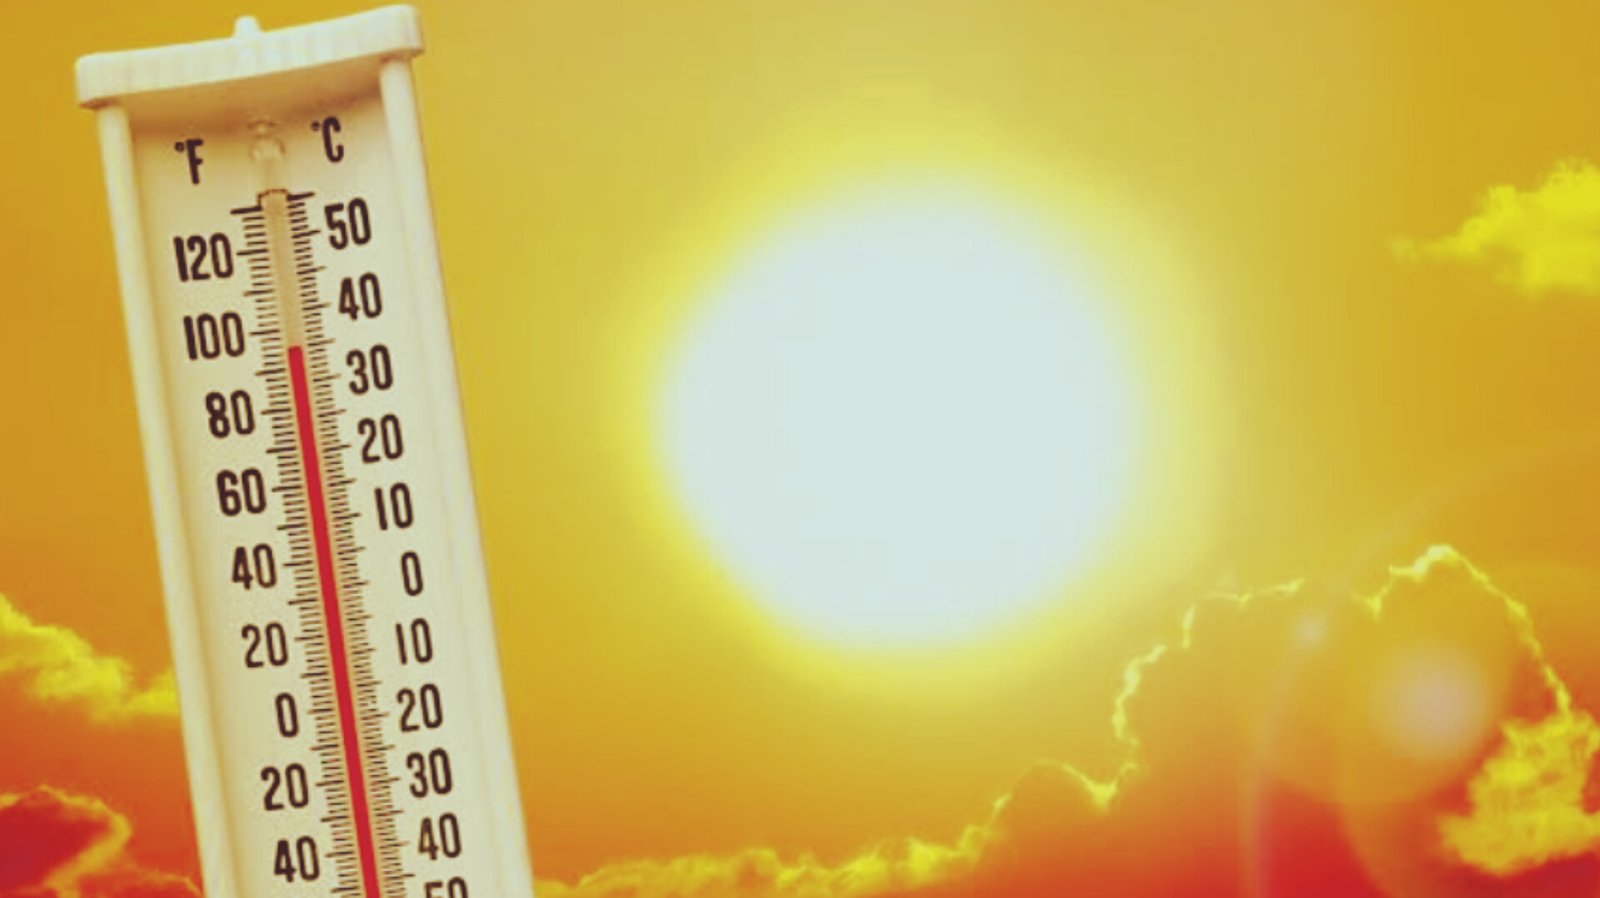 Odisha swelters as heatwave grips state: 28 places record temperatures above 40°C